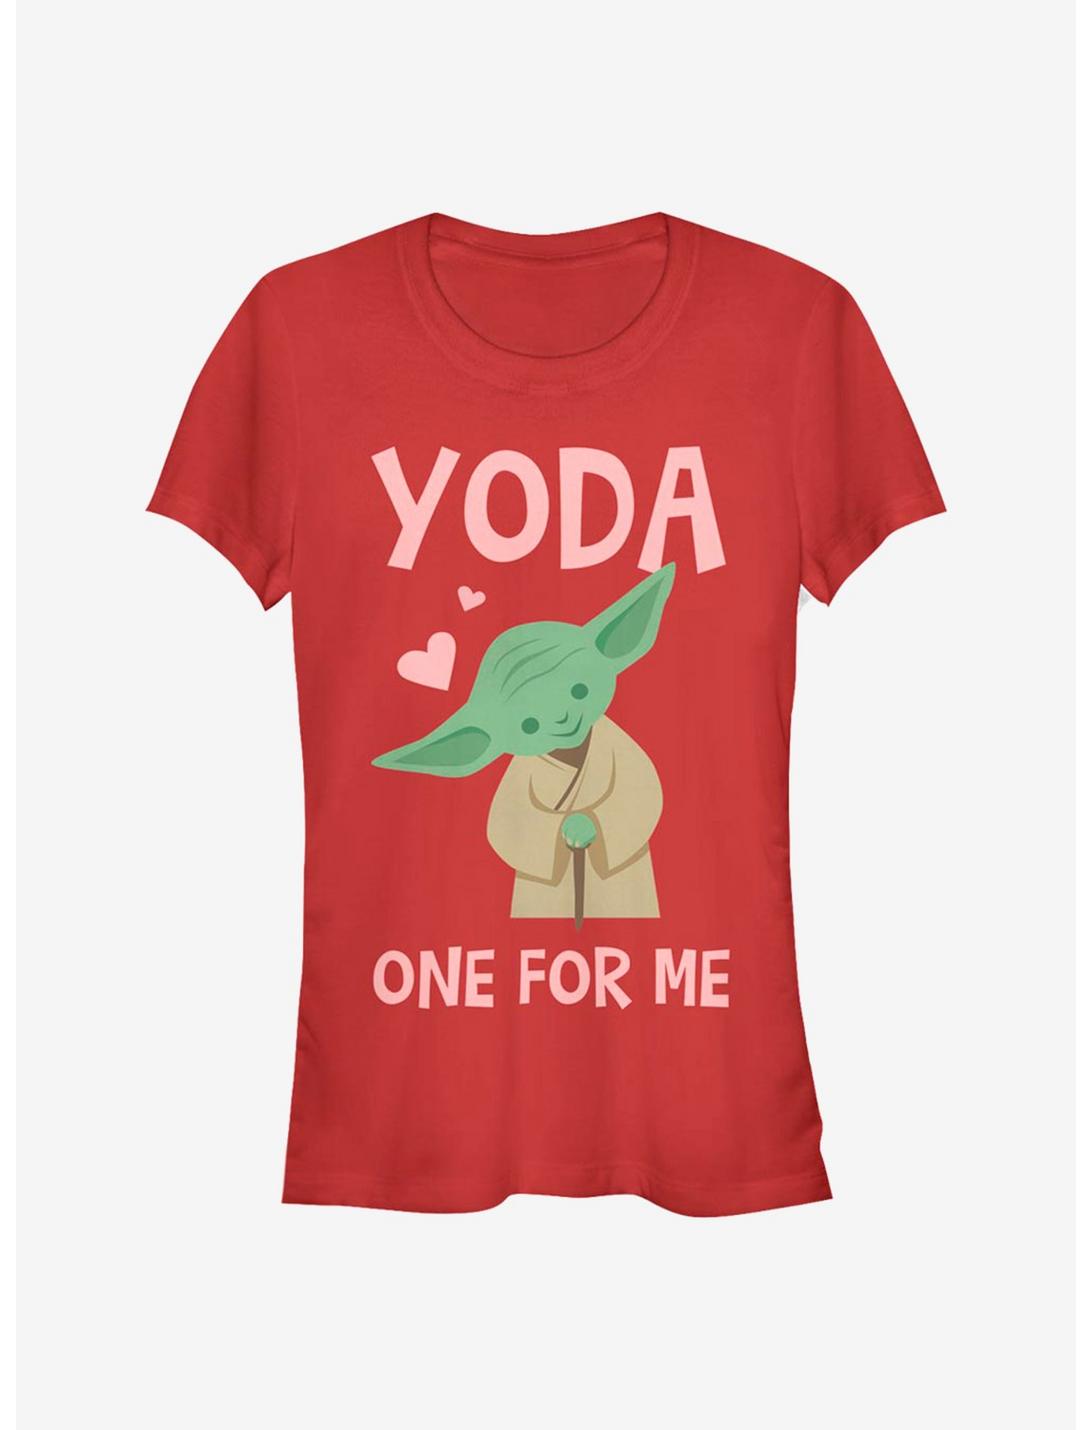 Star Wars Yoda One For Me Girls T-Shirt, RED, hi-res